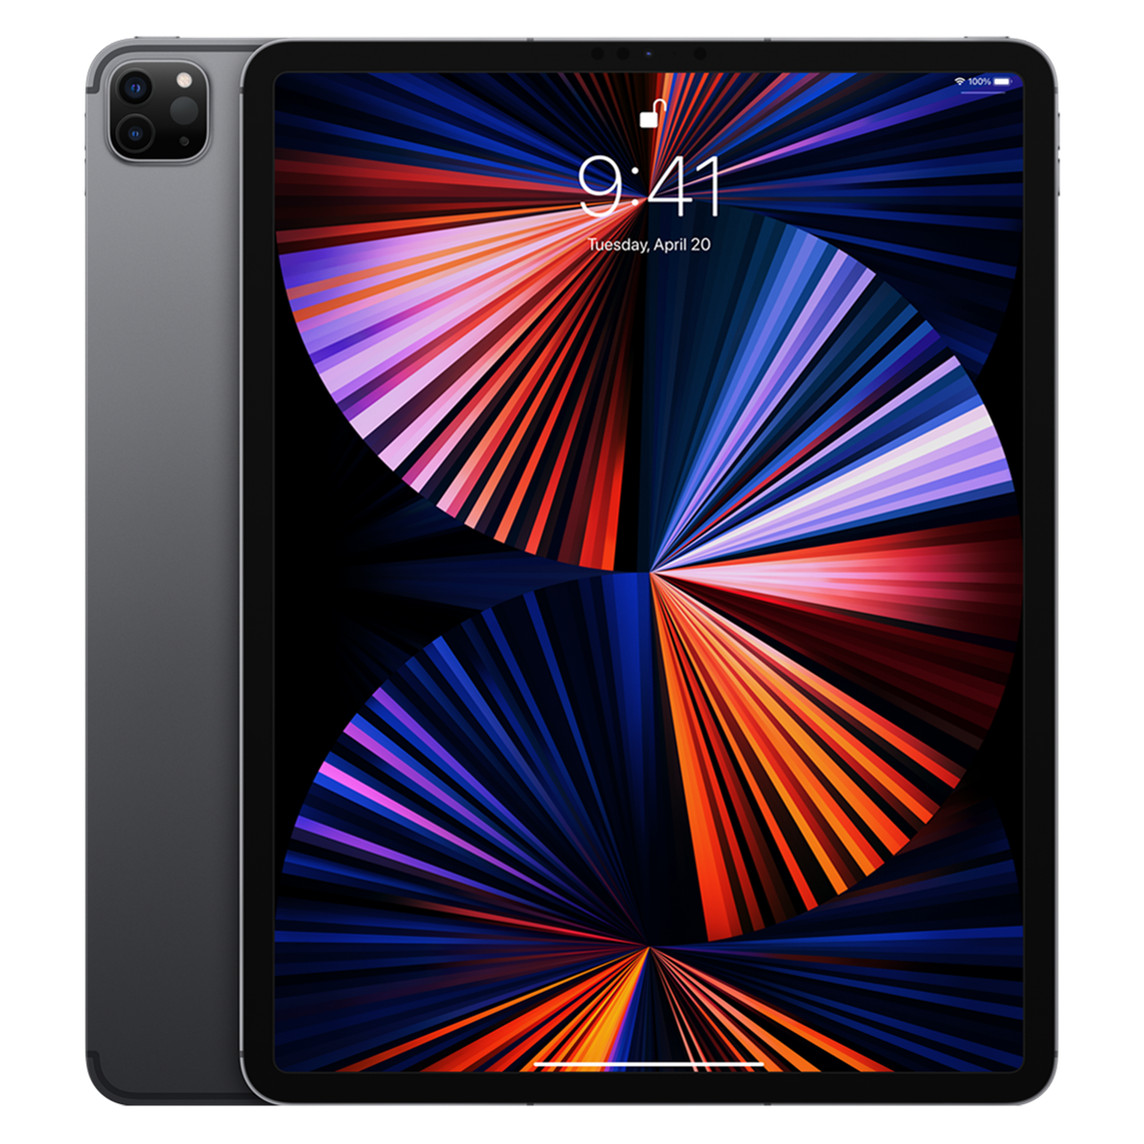 12.9-inch iPad Pro, back exterior, Pro Camera system, Space Grey finish, front exterior, all-screen design